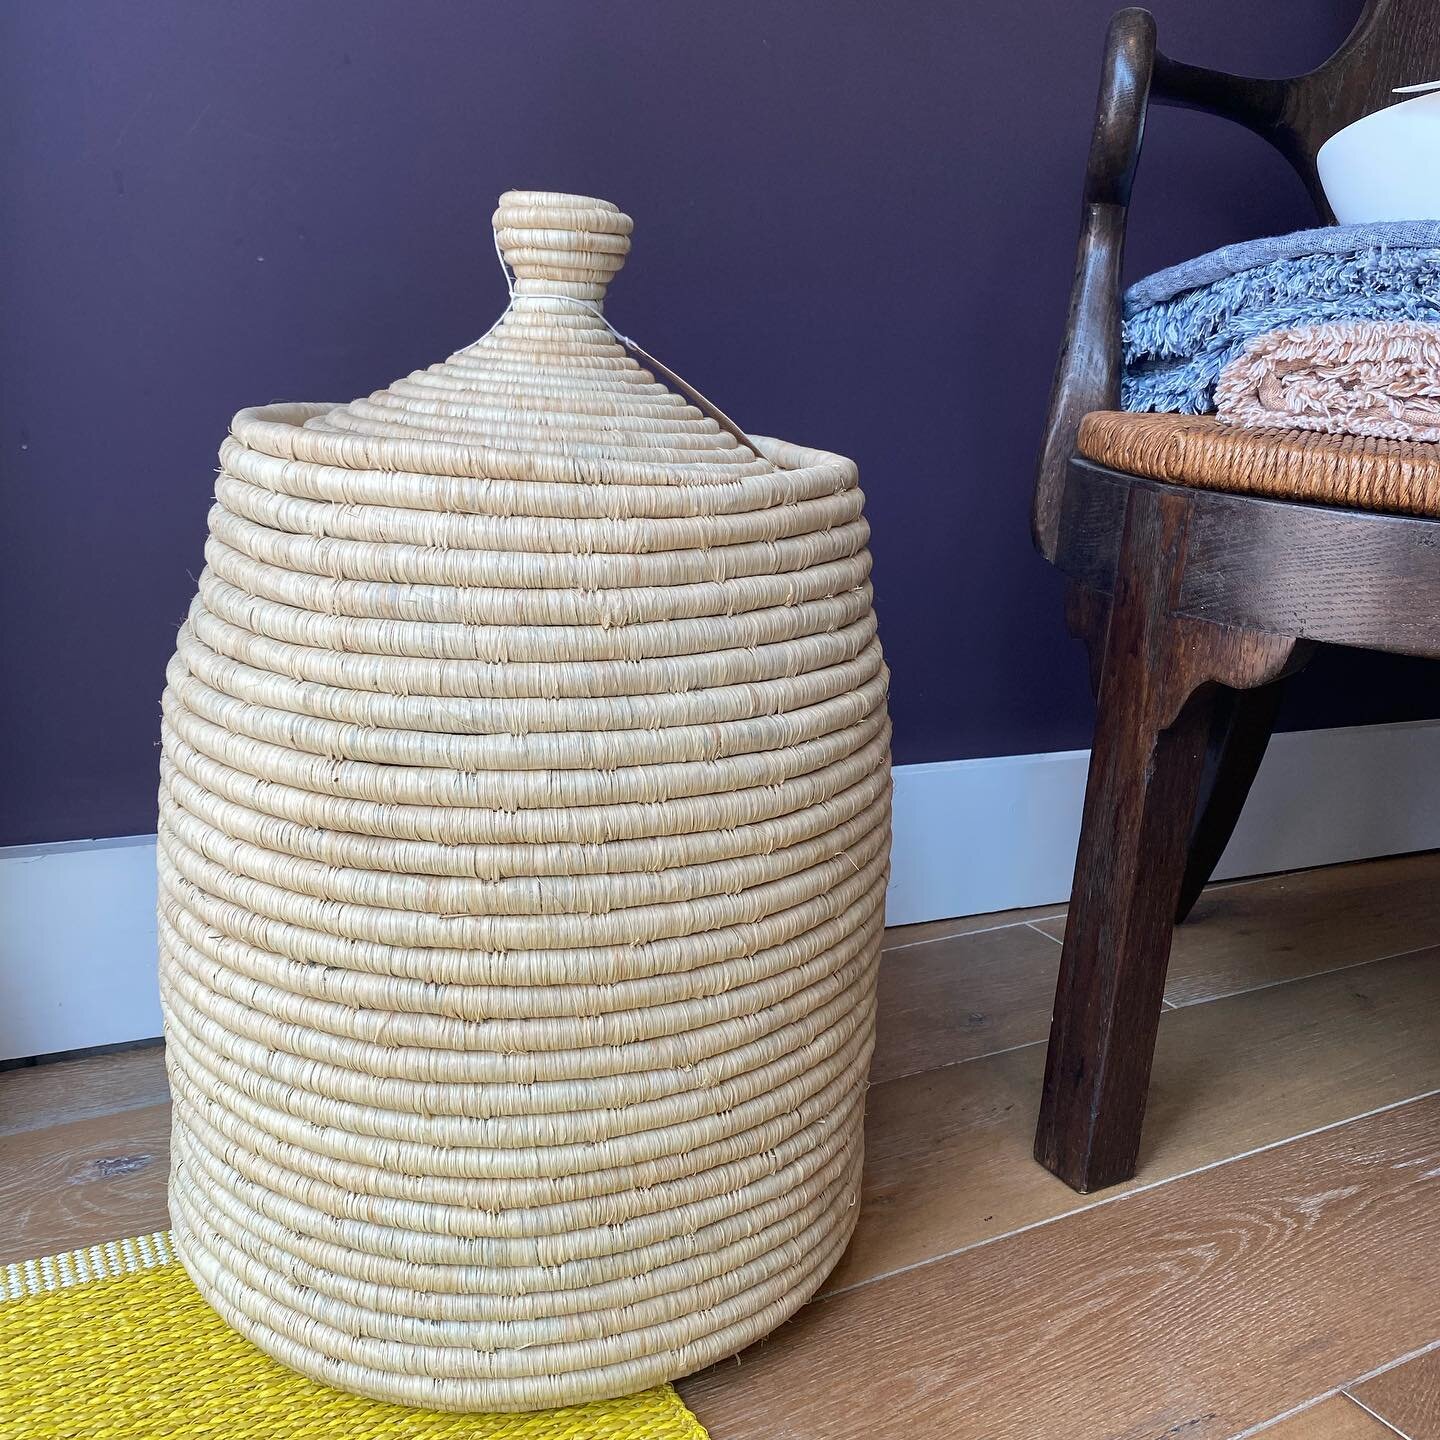 Hand-woven raffia baskets are back in stock! Perfect for extra blanket and pillow storage, toys, or even as a clothes hamper. 
.
These always go quickly so stop in this week before we sell out! 
.
.
.
.
.
.
.
.
.

.
.
.
.
.

.
.
.
.
.
.

@uptownmontc